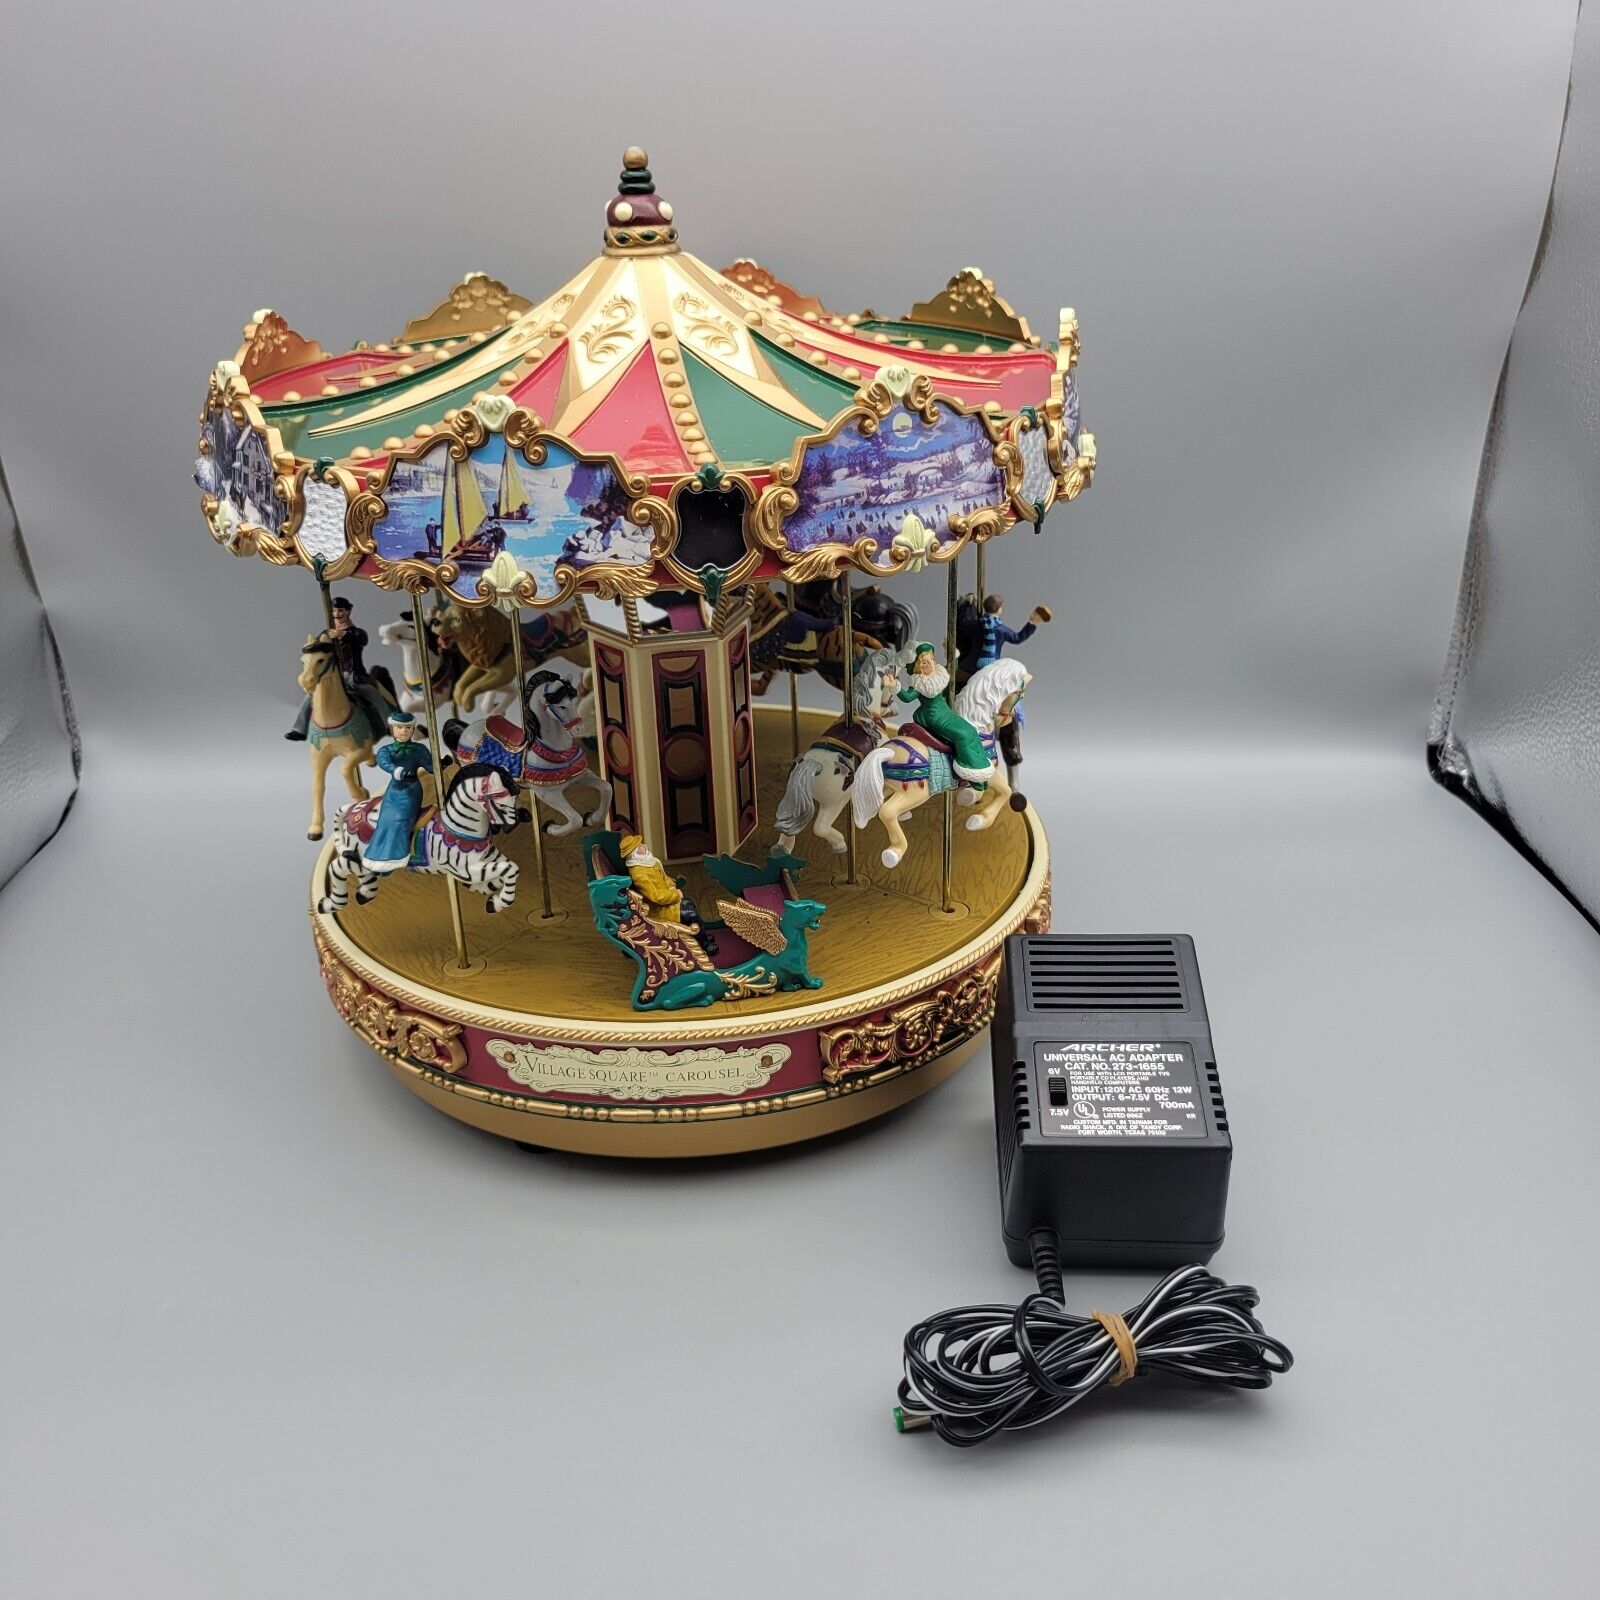 Mr Christmas The Carousel Display Lighted Motion Musical 30 Songs No Box WORKS